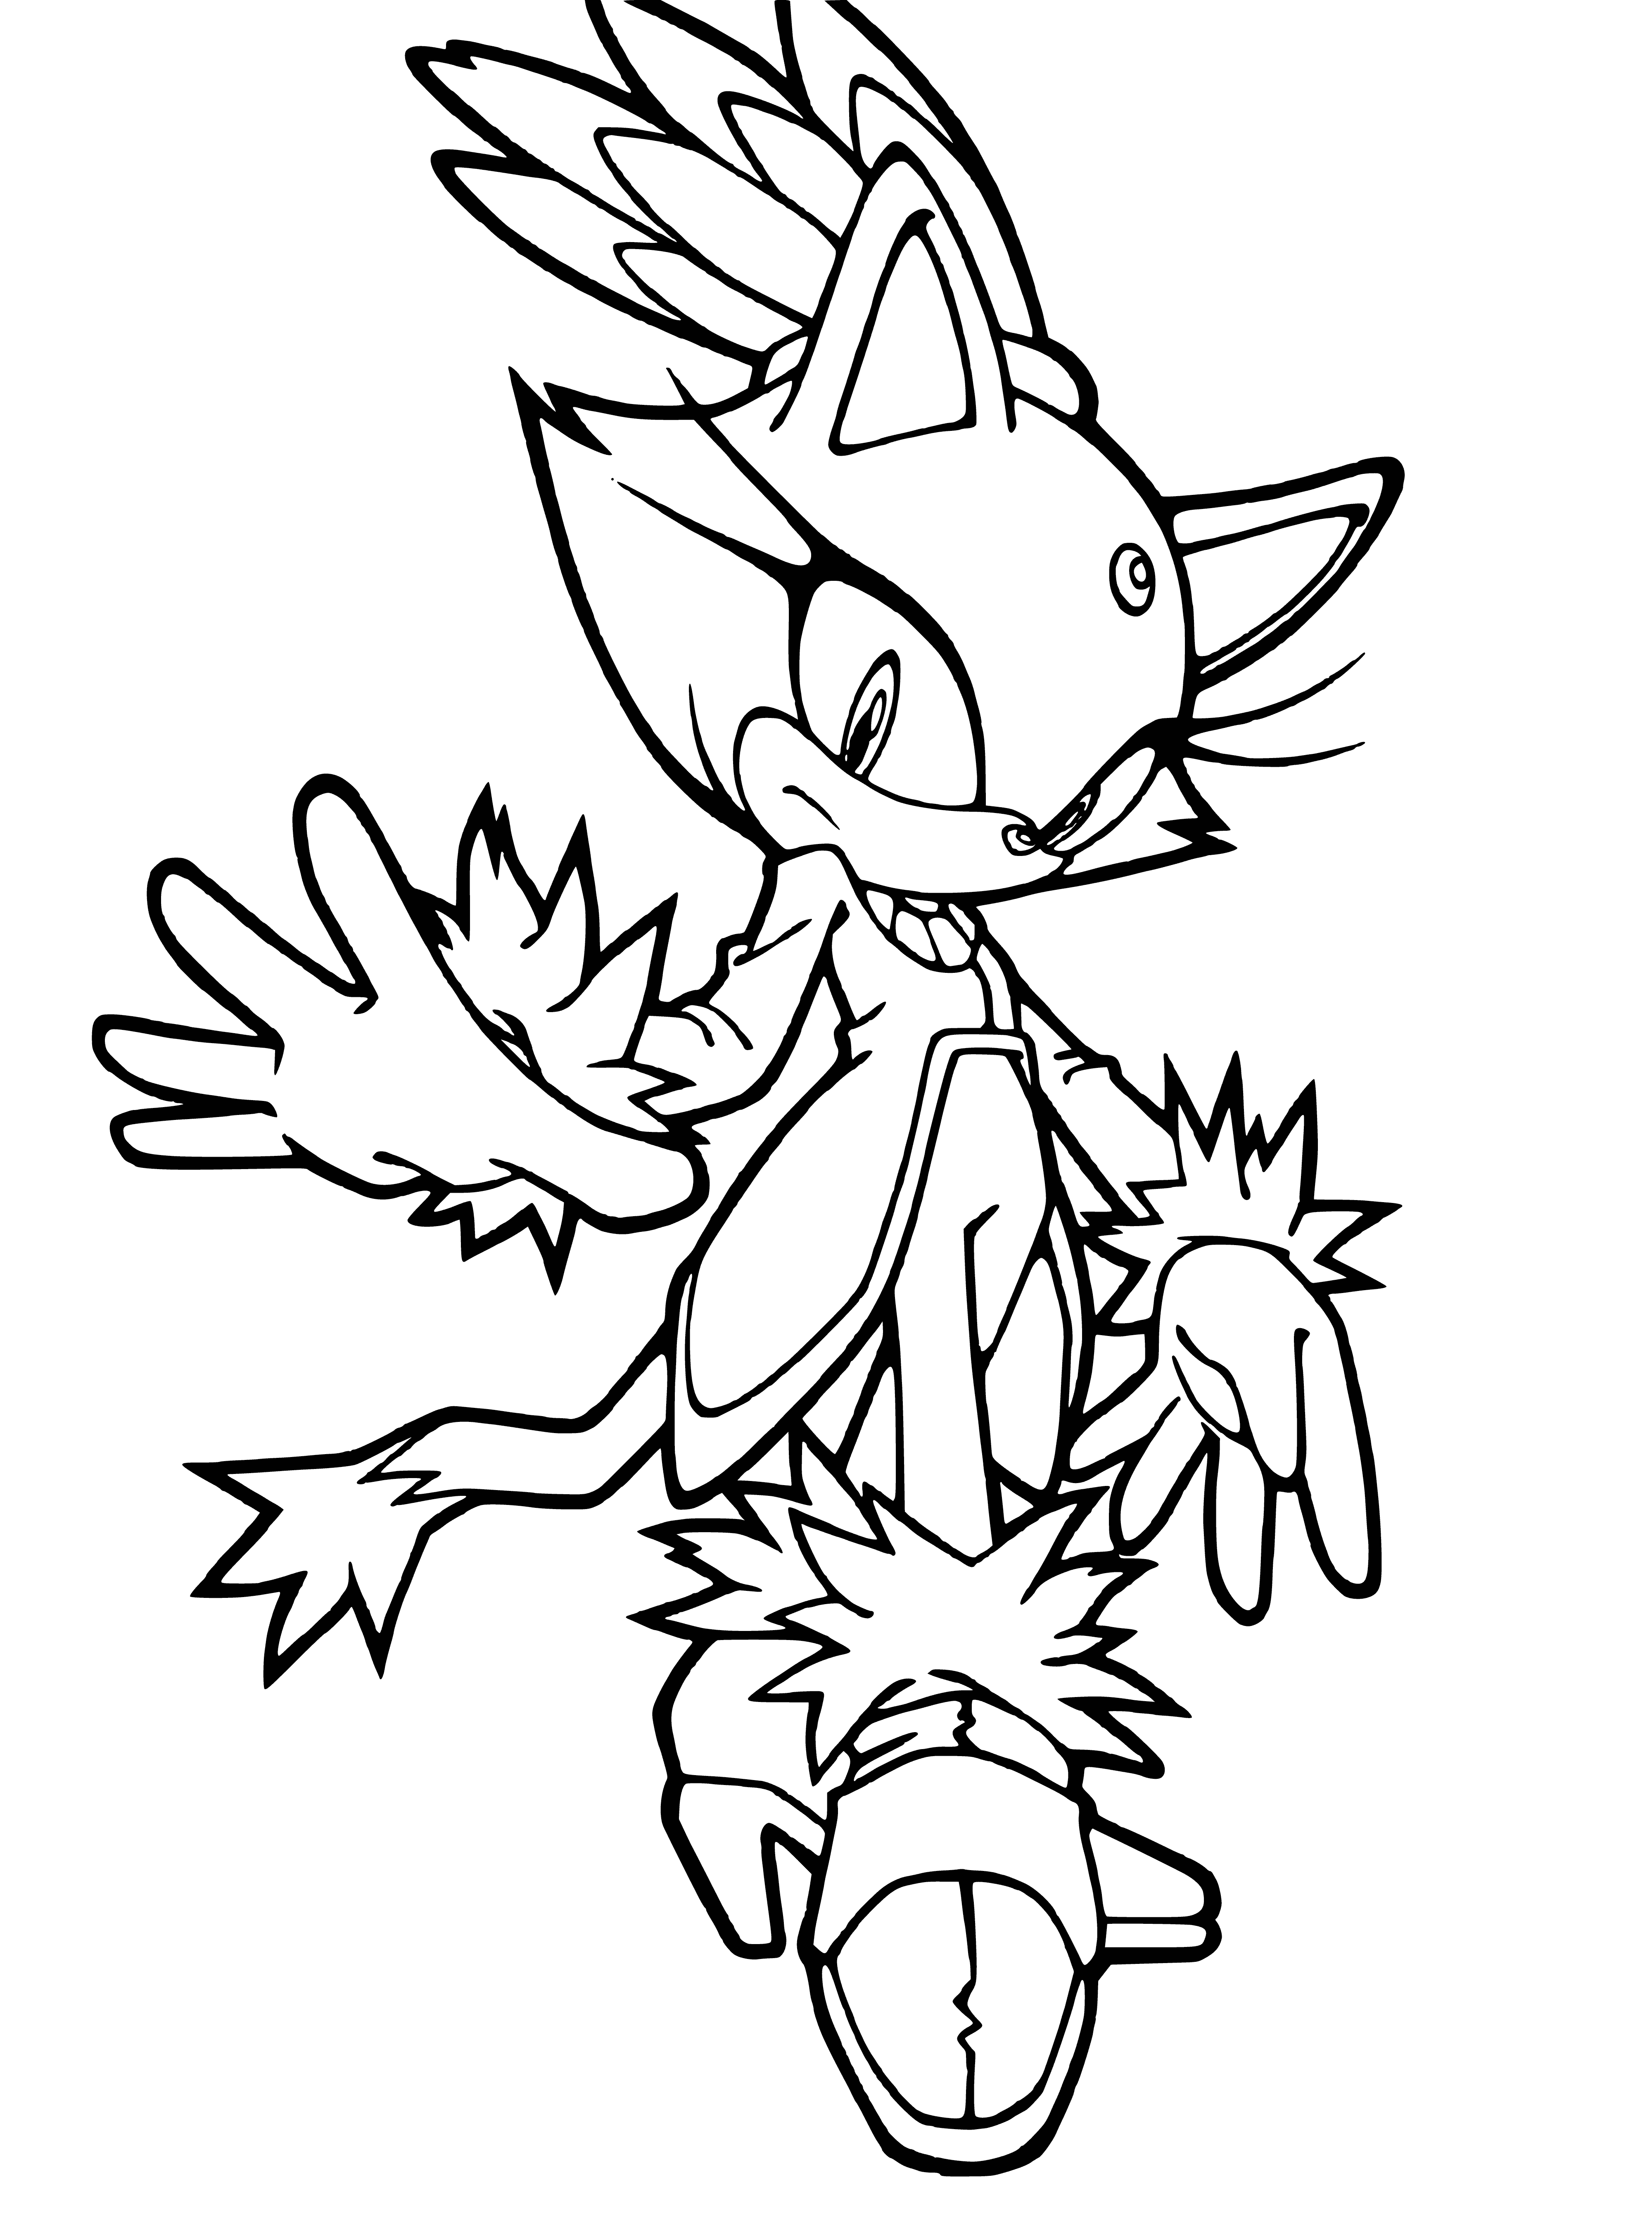 coloring page: A blue hedgehog with red shoes stands, spikes out, in a running pose on a white background.